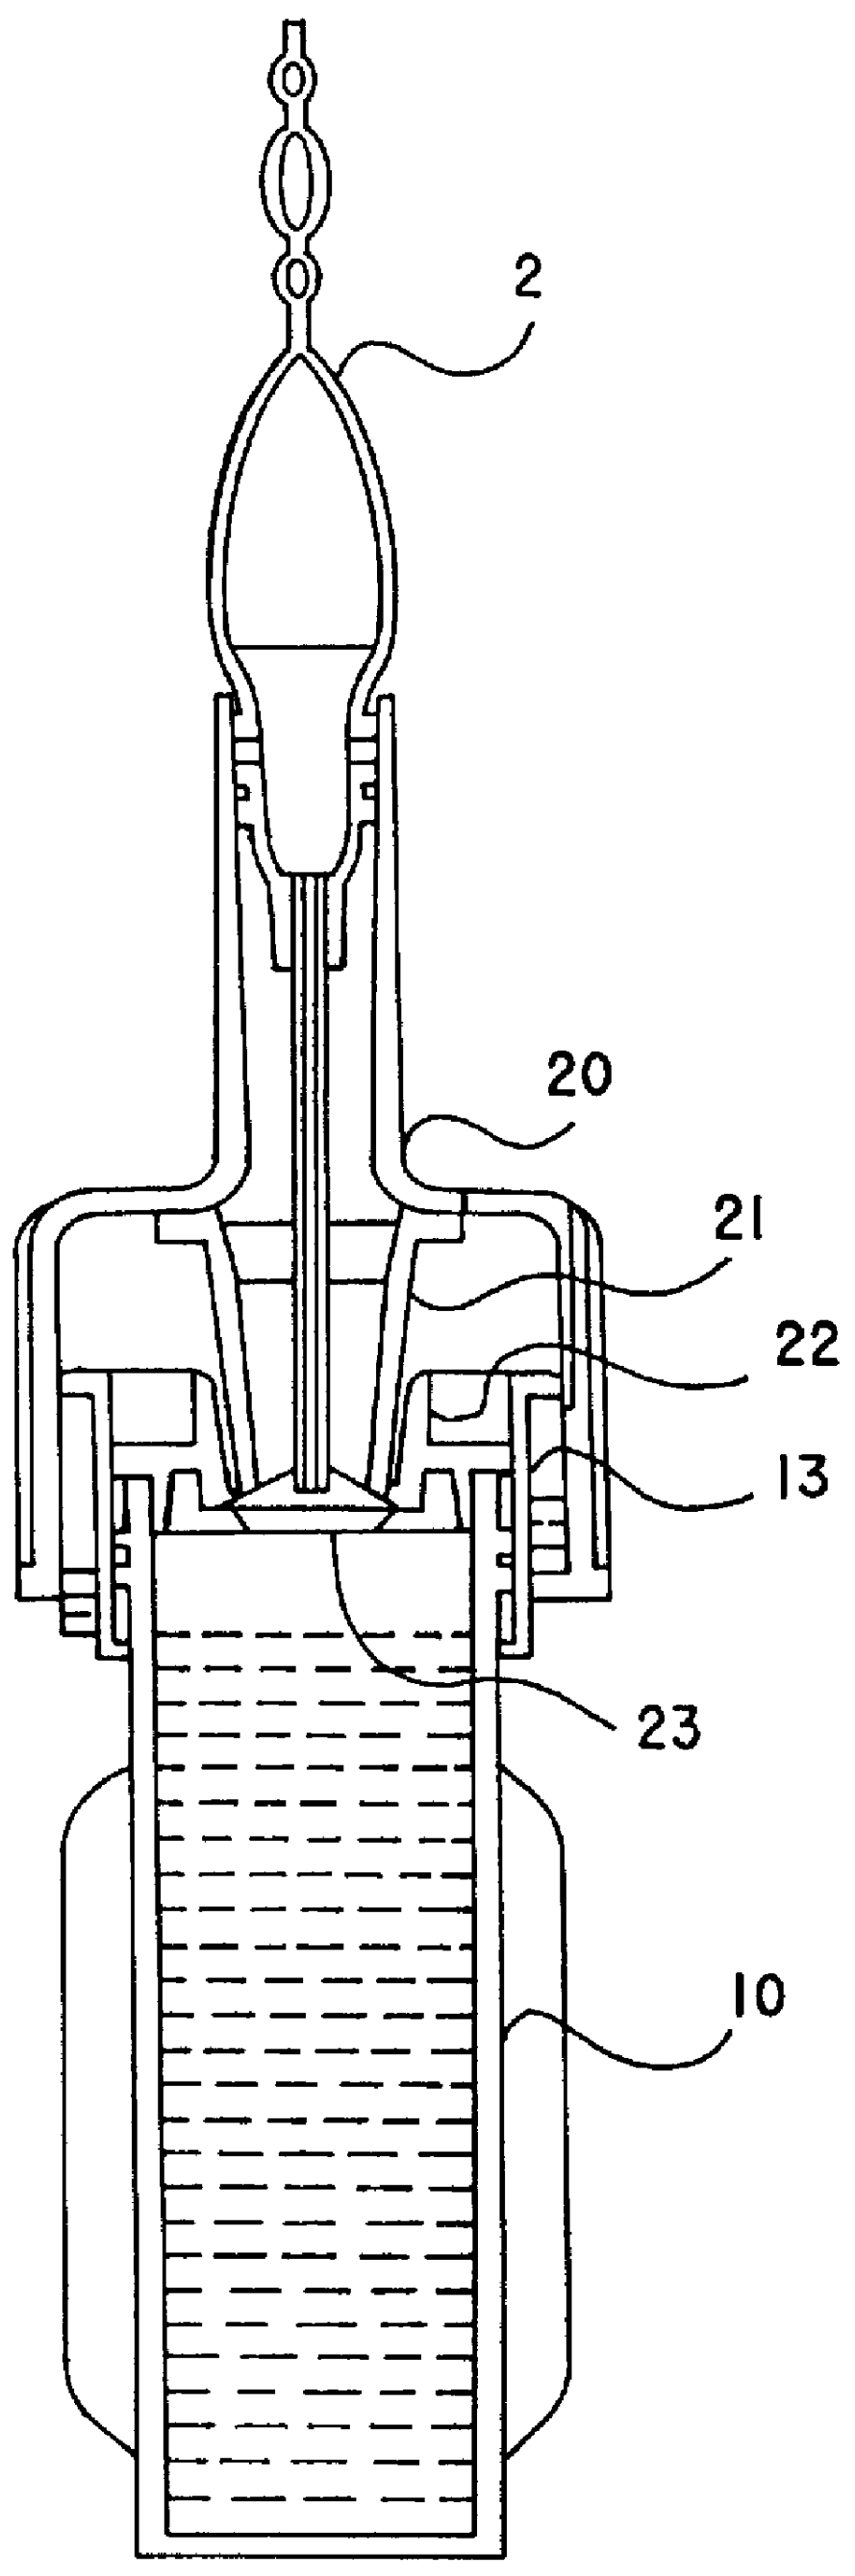 Dispensing device for dispensing small quantities of fluid